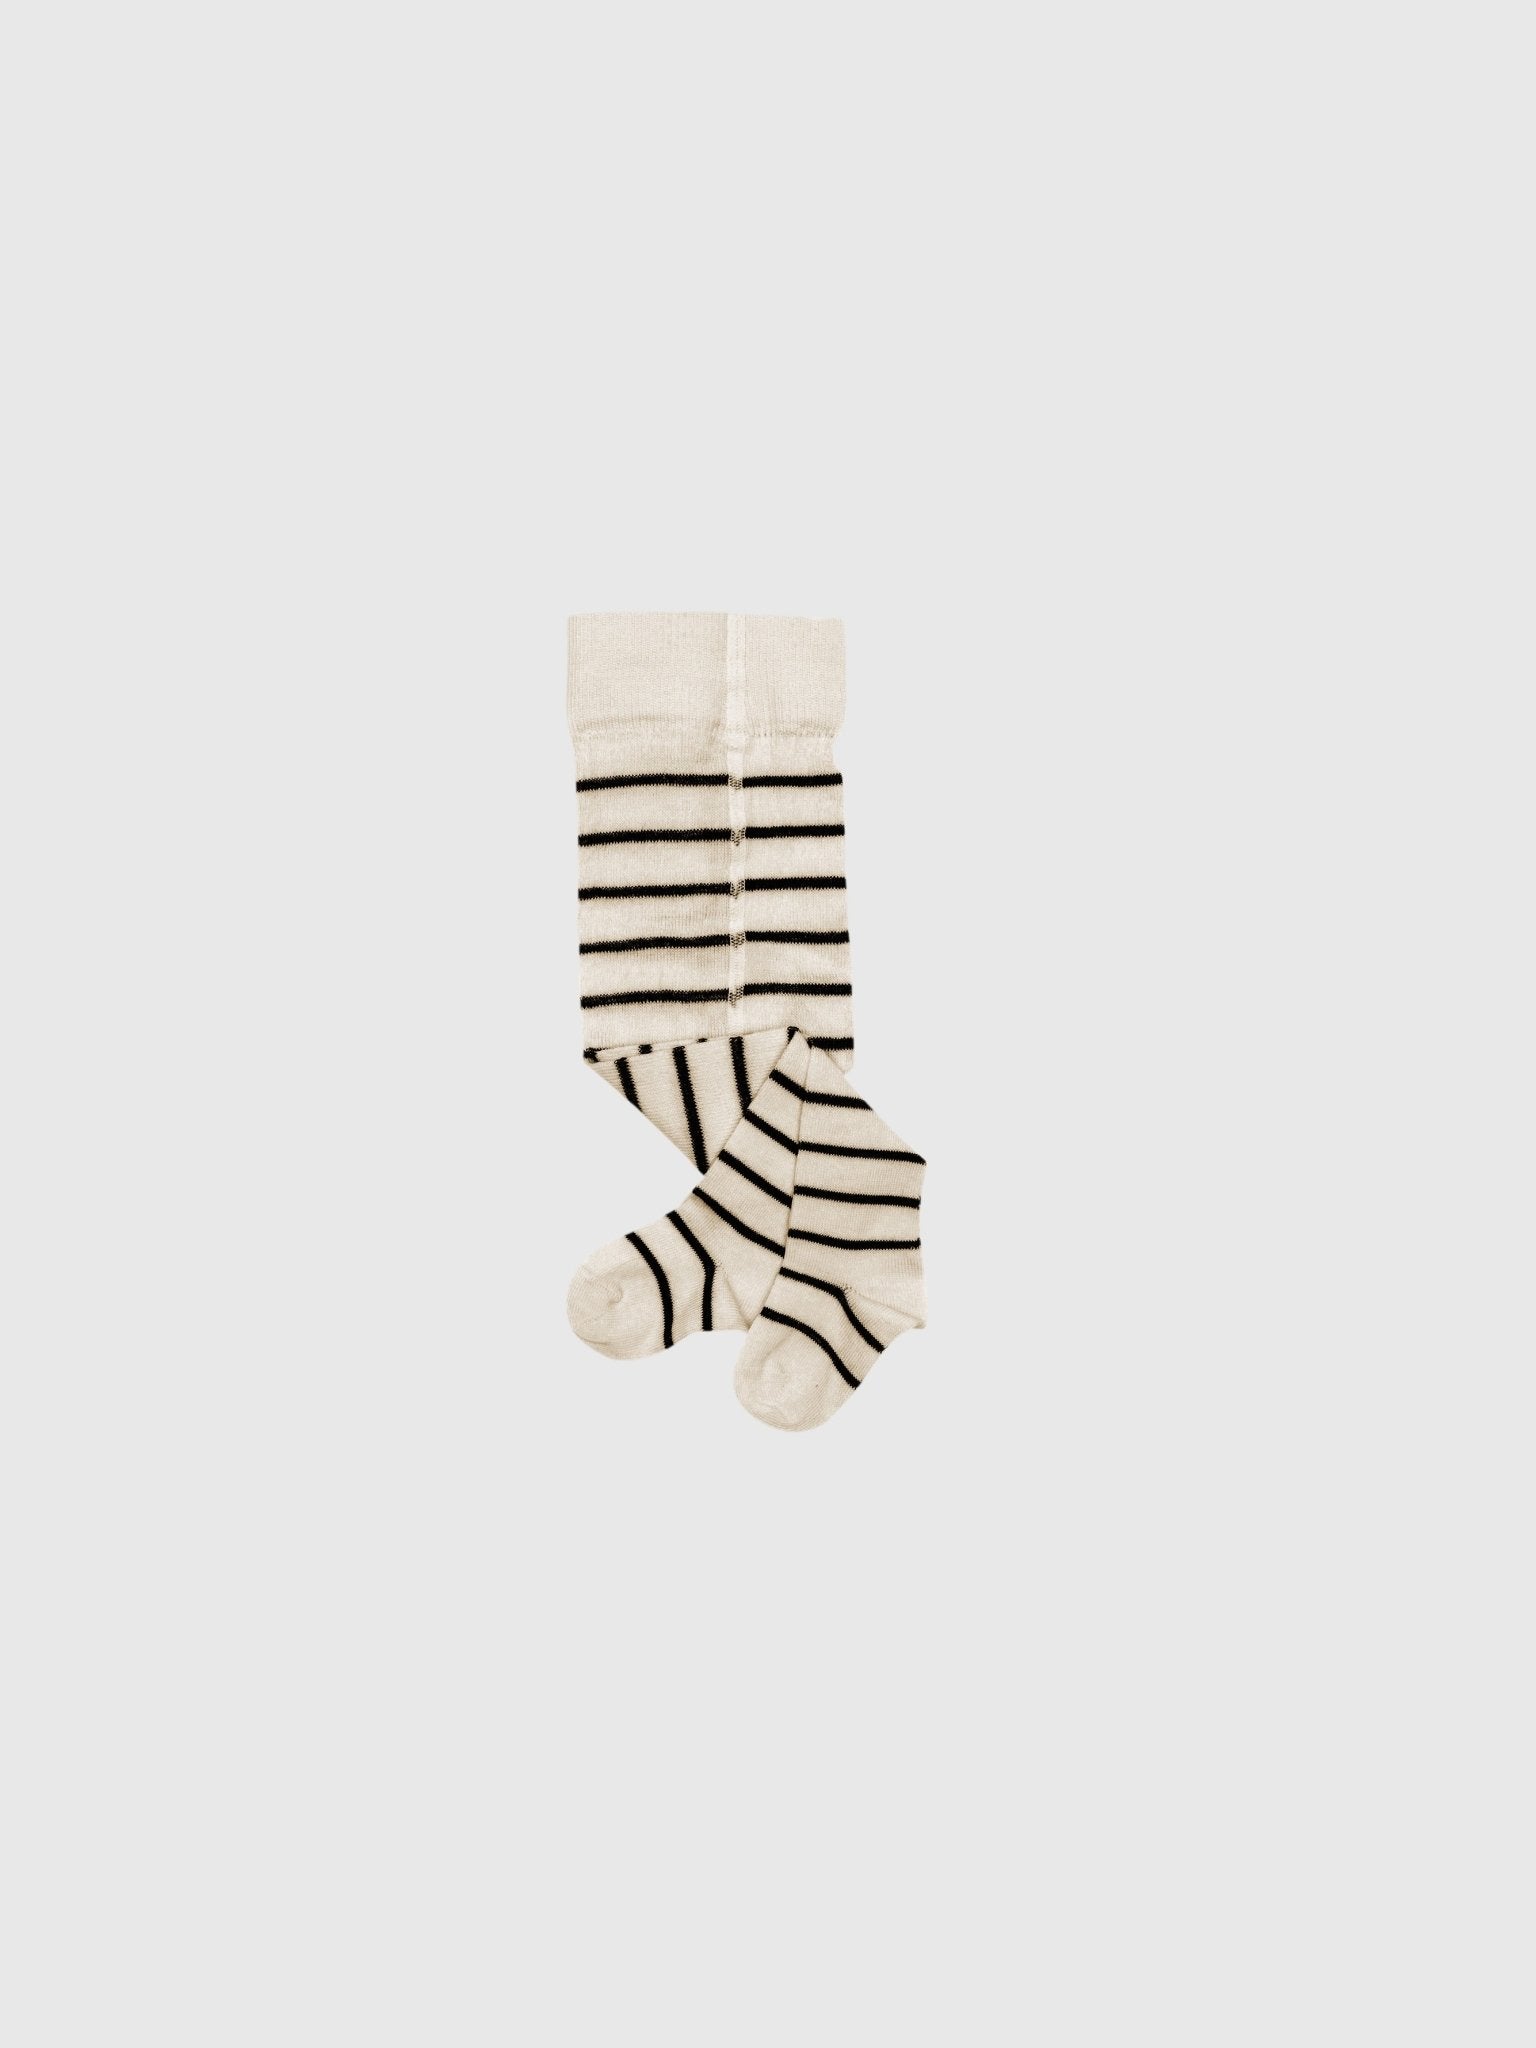 Organic Cotton Tights: Maggie's Cotton Tights, Original Cozy, Sheer,  Textured, Striped, and Infants.